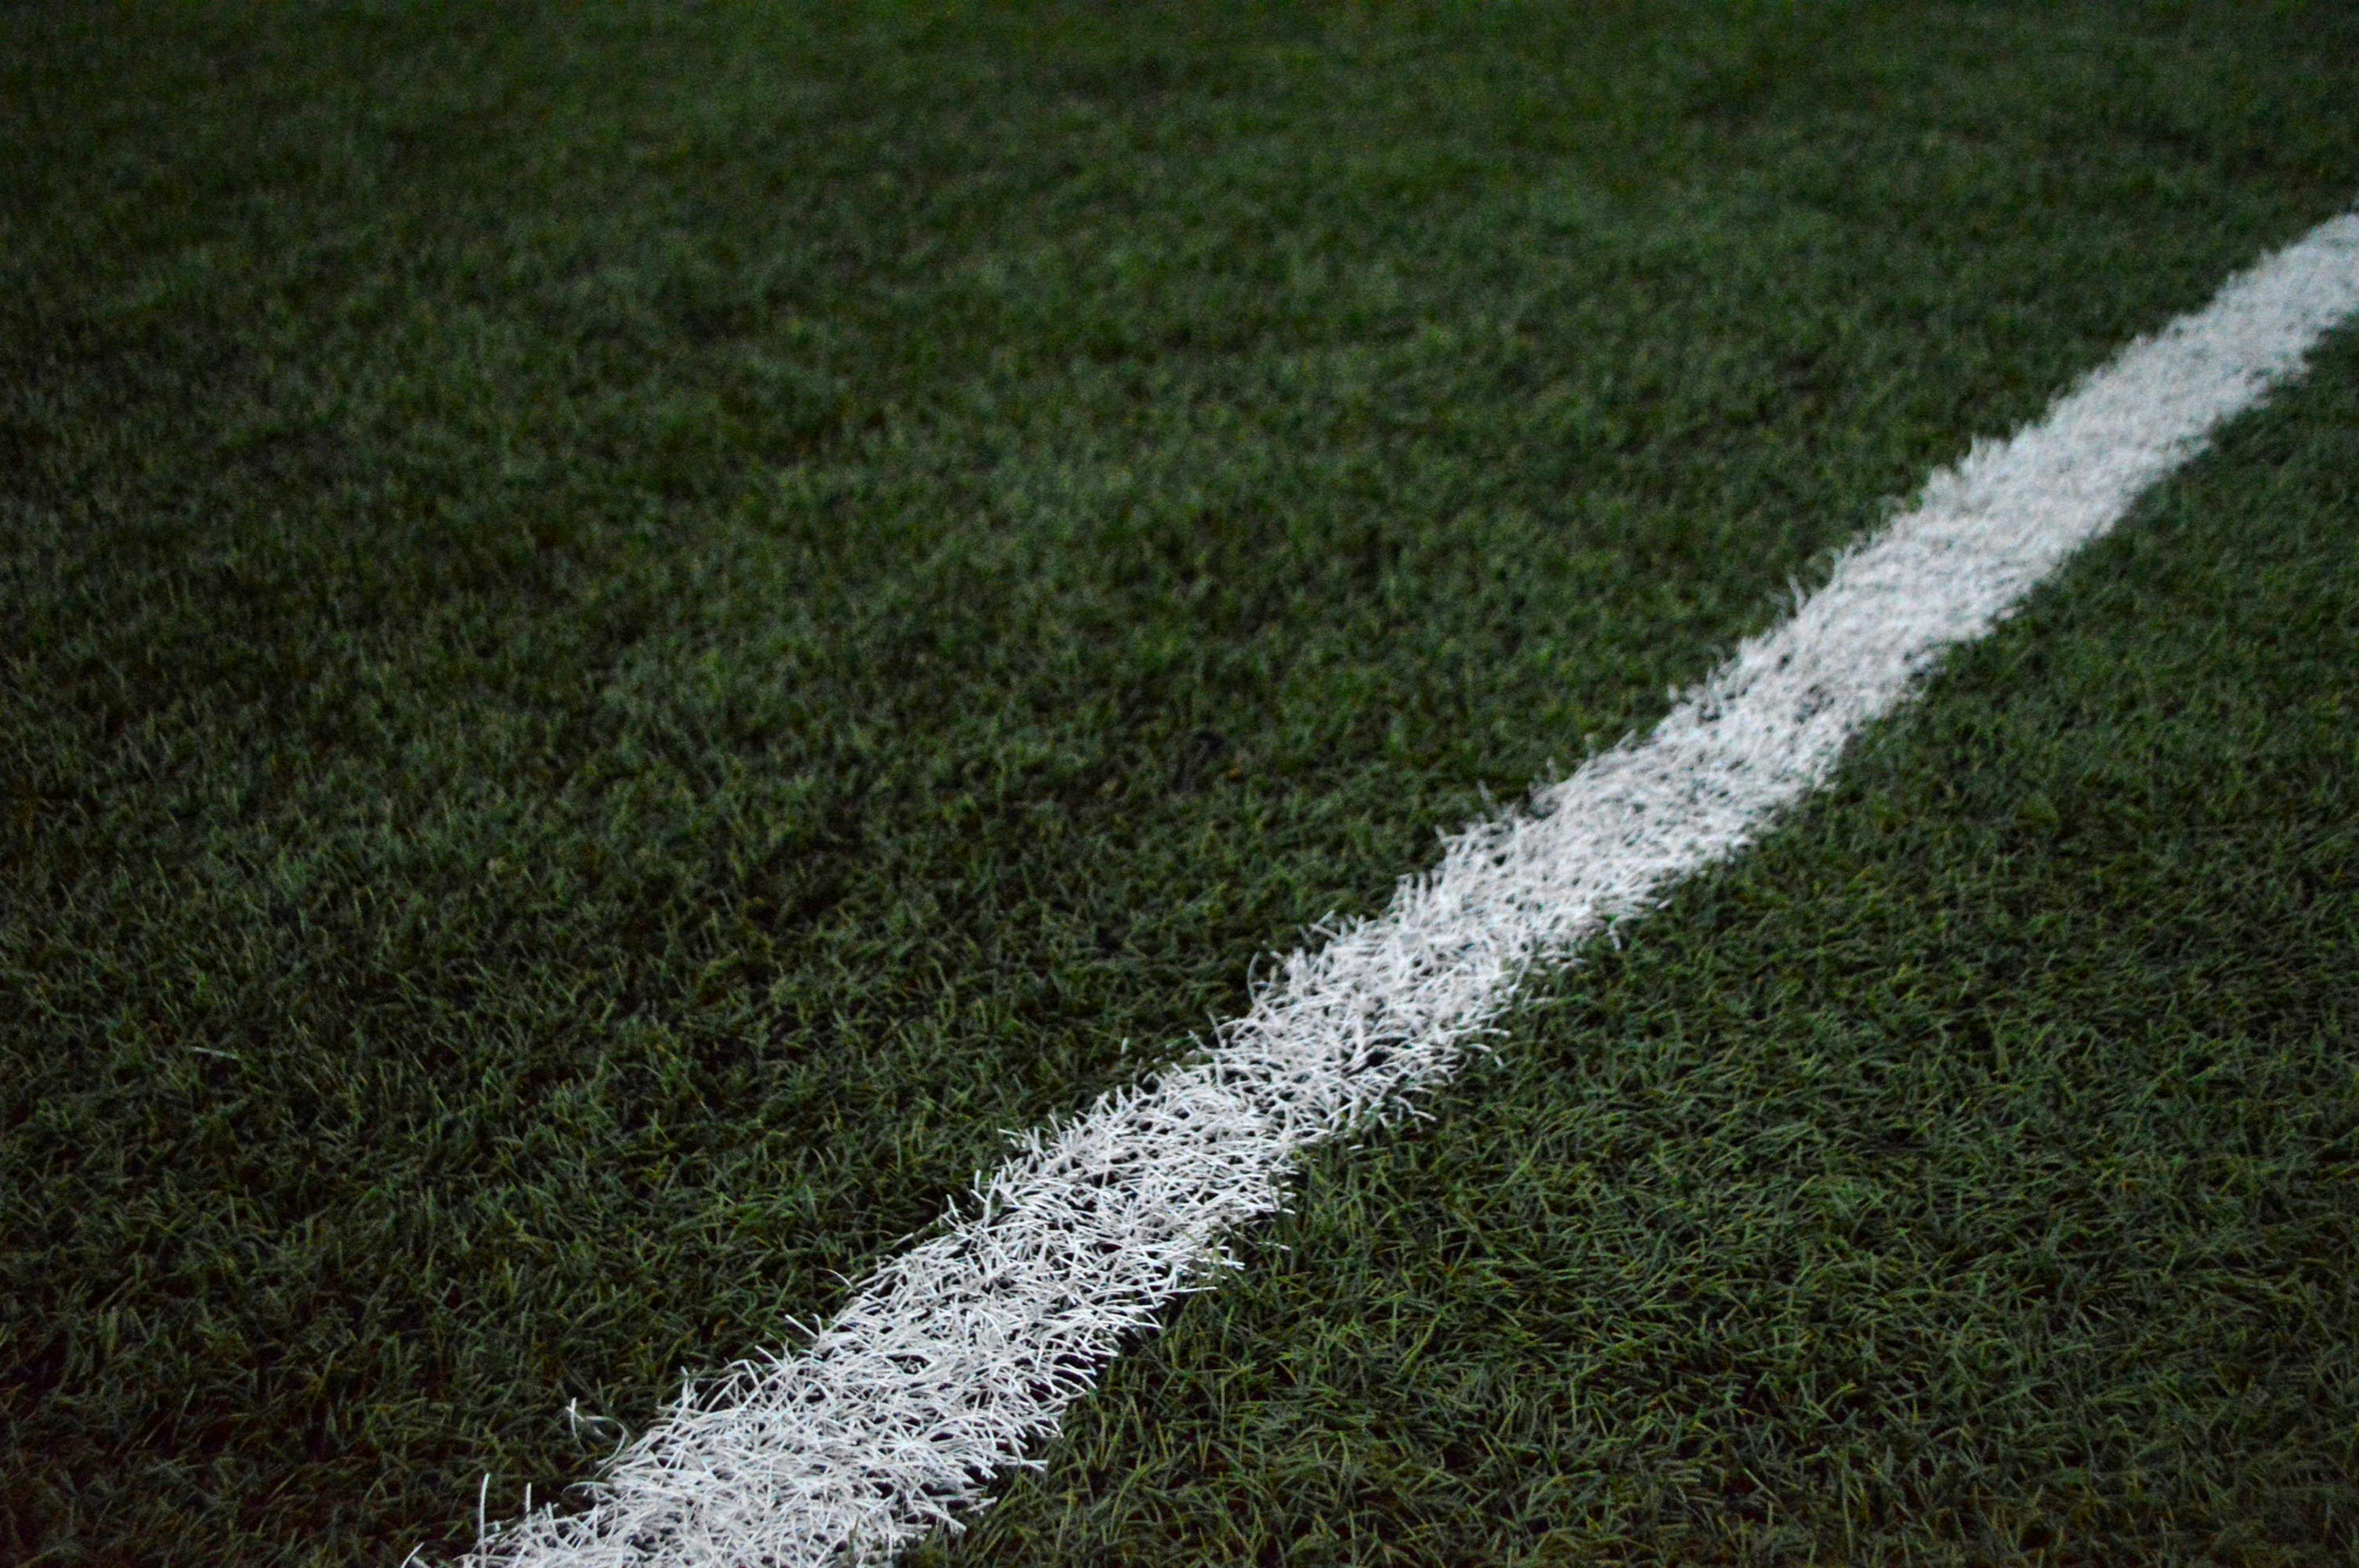 Free stock photo of American football, athletic field, background